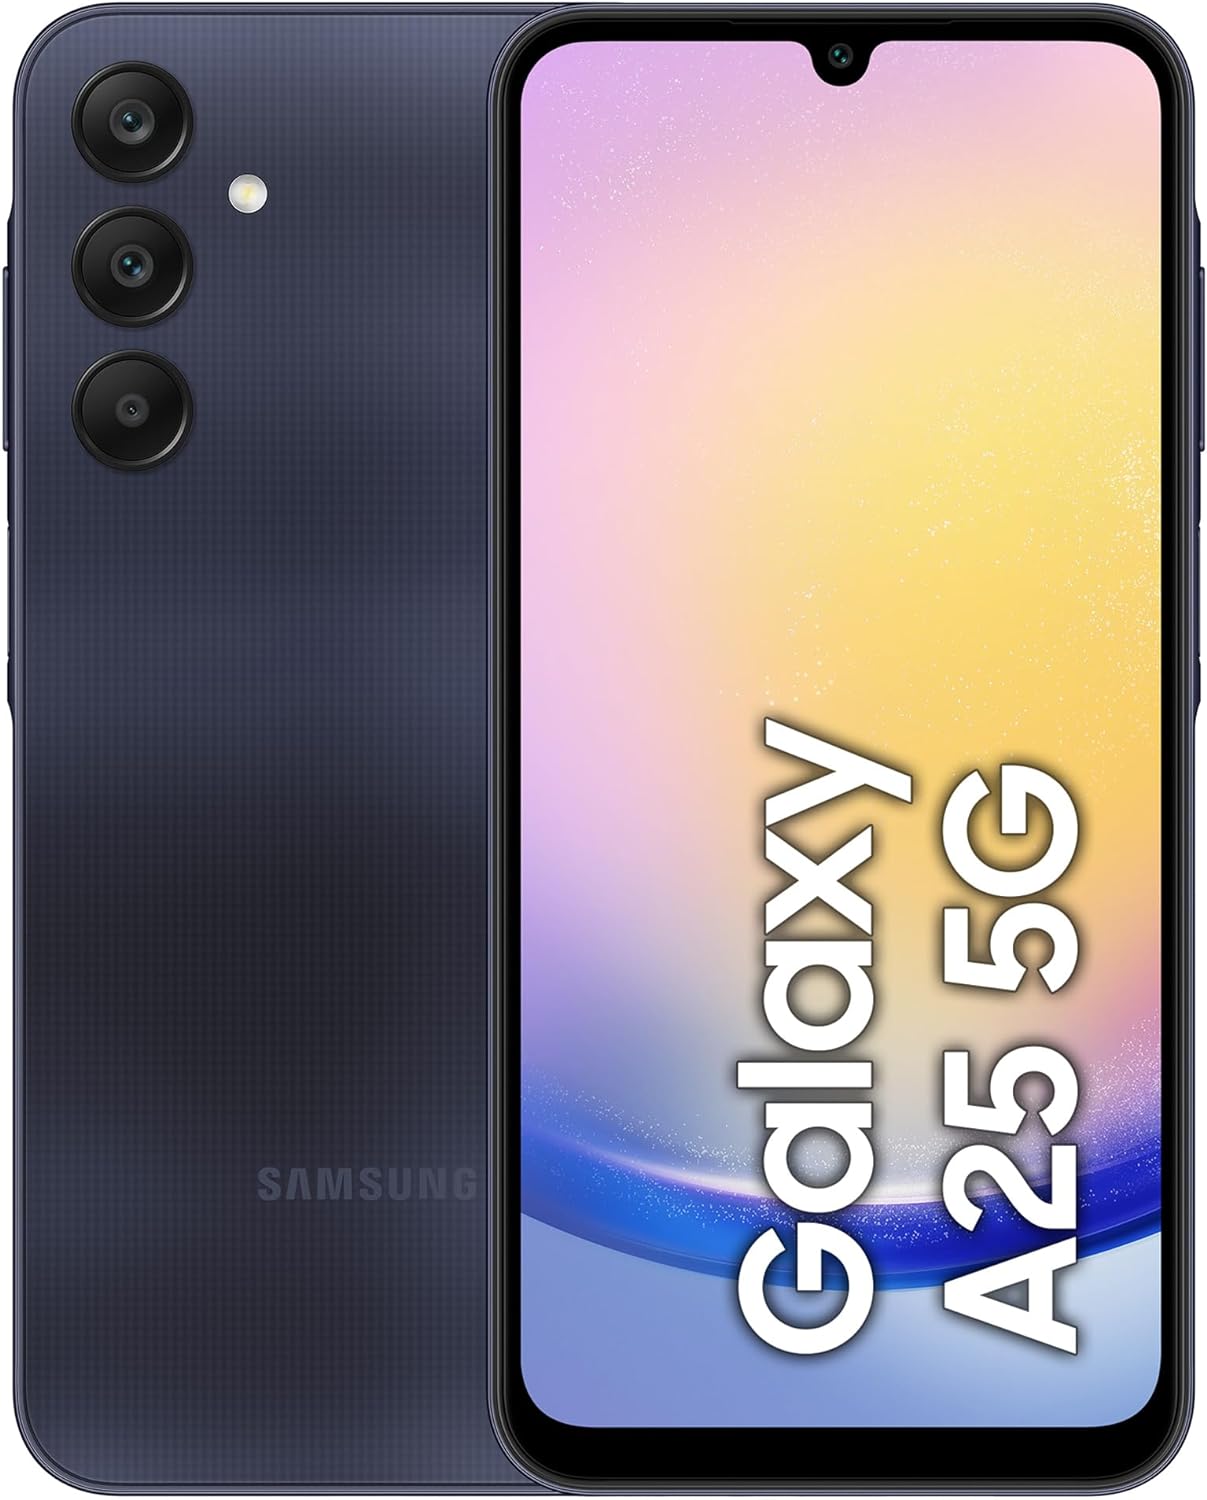 The image shows a smartphone, specifically a Samsung Galaxy A25 5G model. The device showcases a modern design with a display that has a small, centered notch at the top, presumably for the front-facing camera. The rear of the phone features a triple-camera setup aligned vertically along with an LED flash. The back panel also has a textured pattern and displays the Samsung logo. The screen displays the 